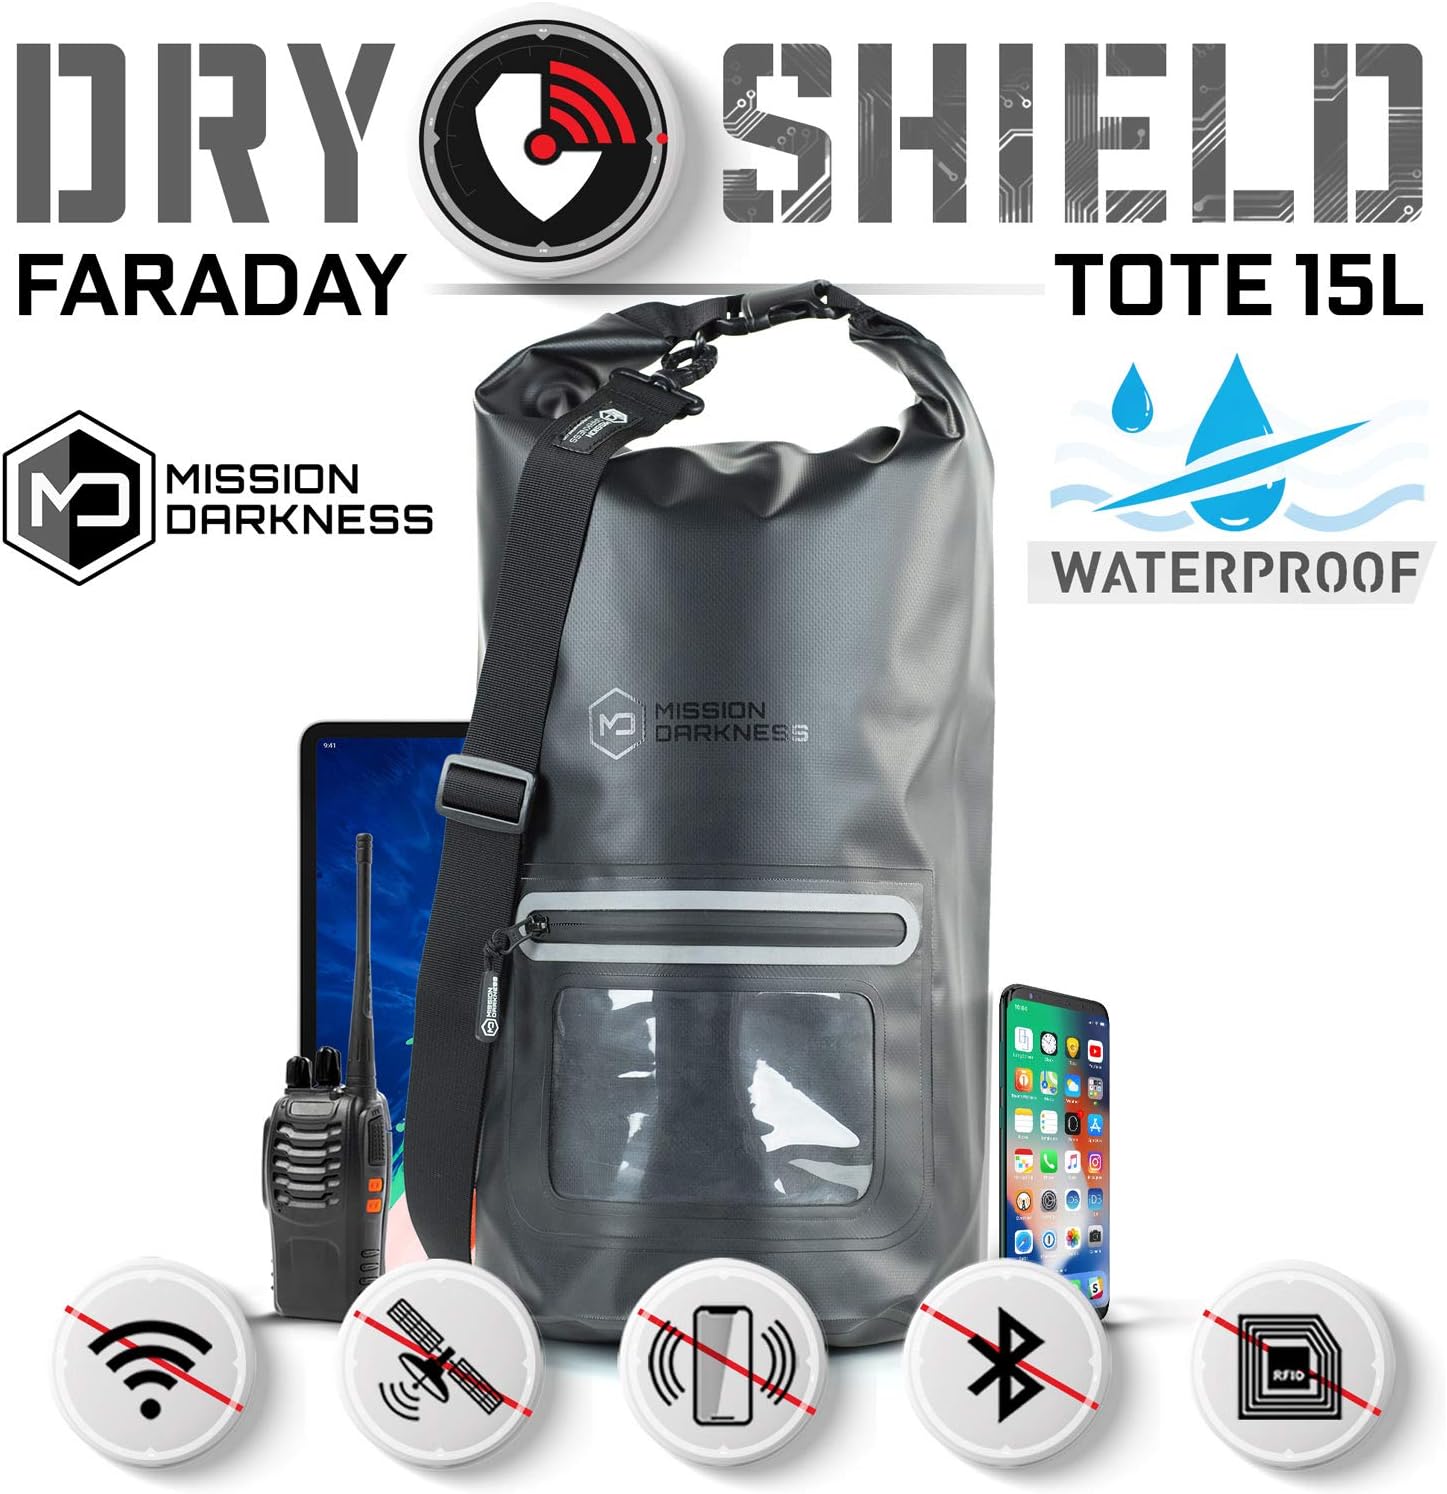 Mission Darkness Dry Shield Faraday Tote 15L Waterproof Dry Bag